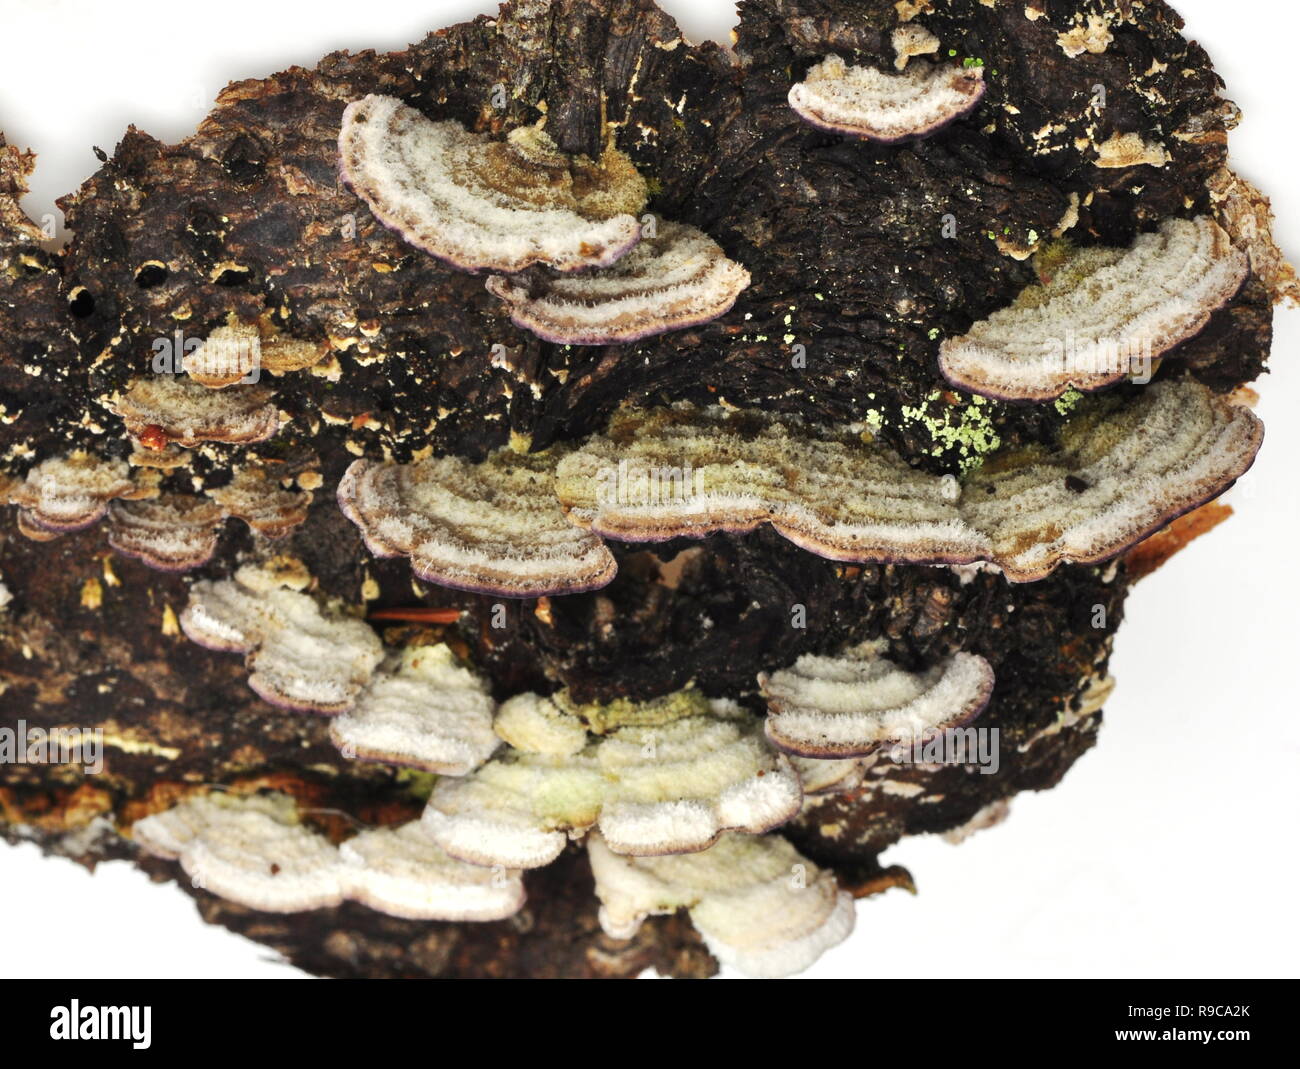 The saprophytic fungus Trichaptum abietinum growing on the bark of a conifer tree Stock Photo